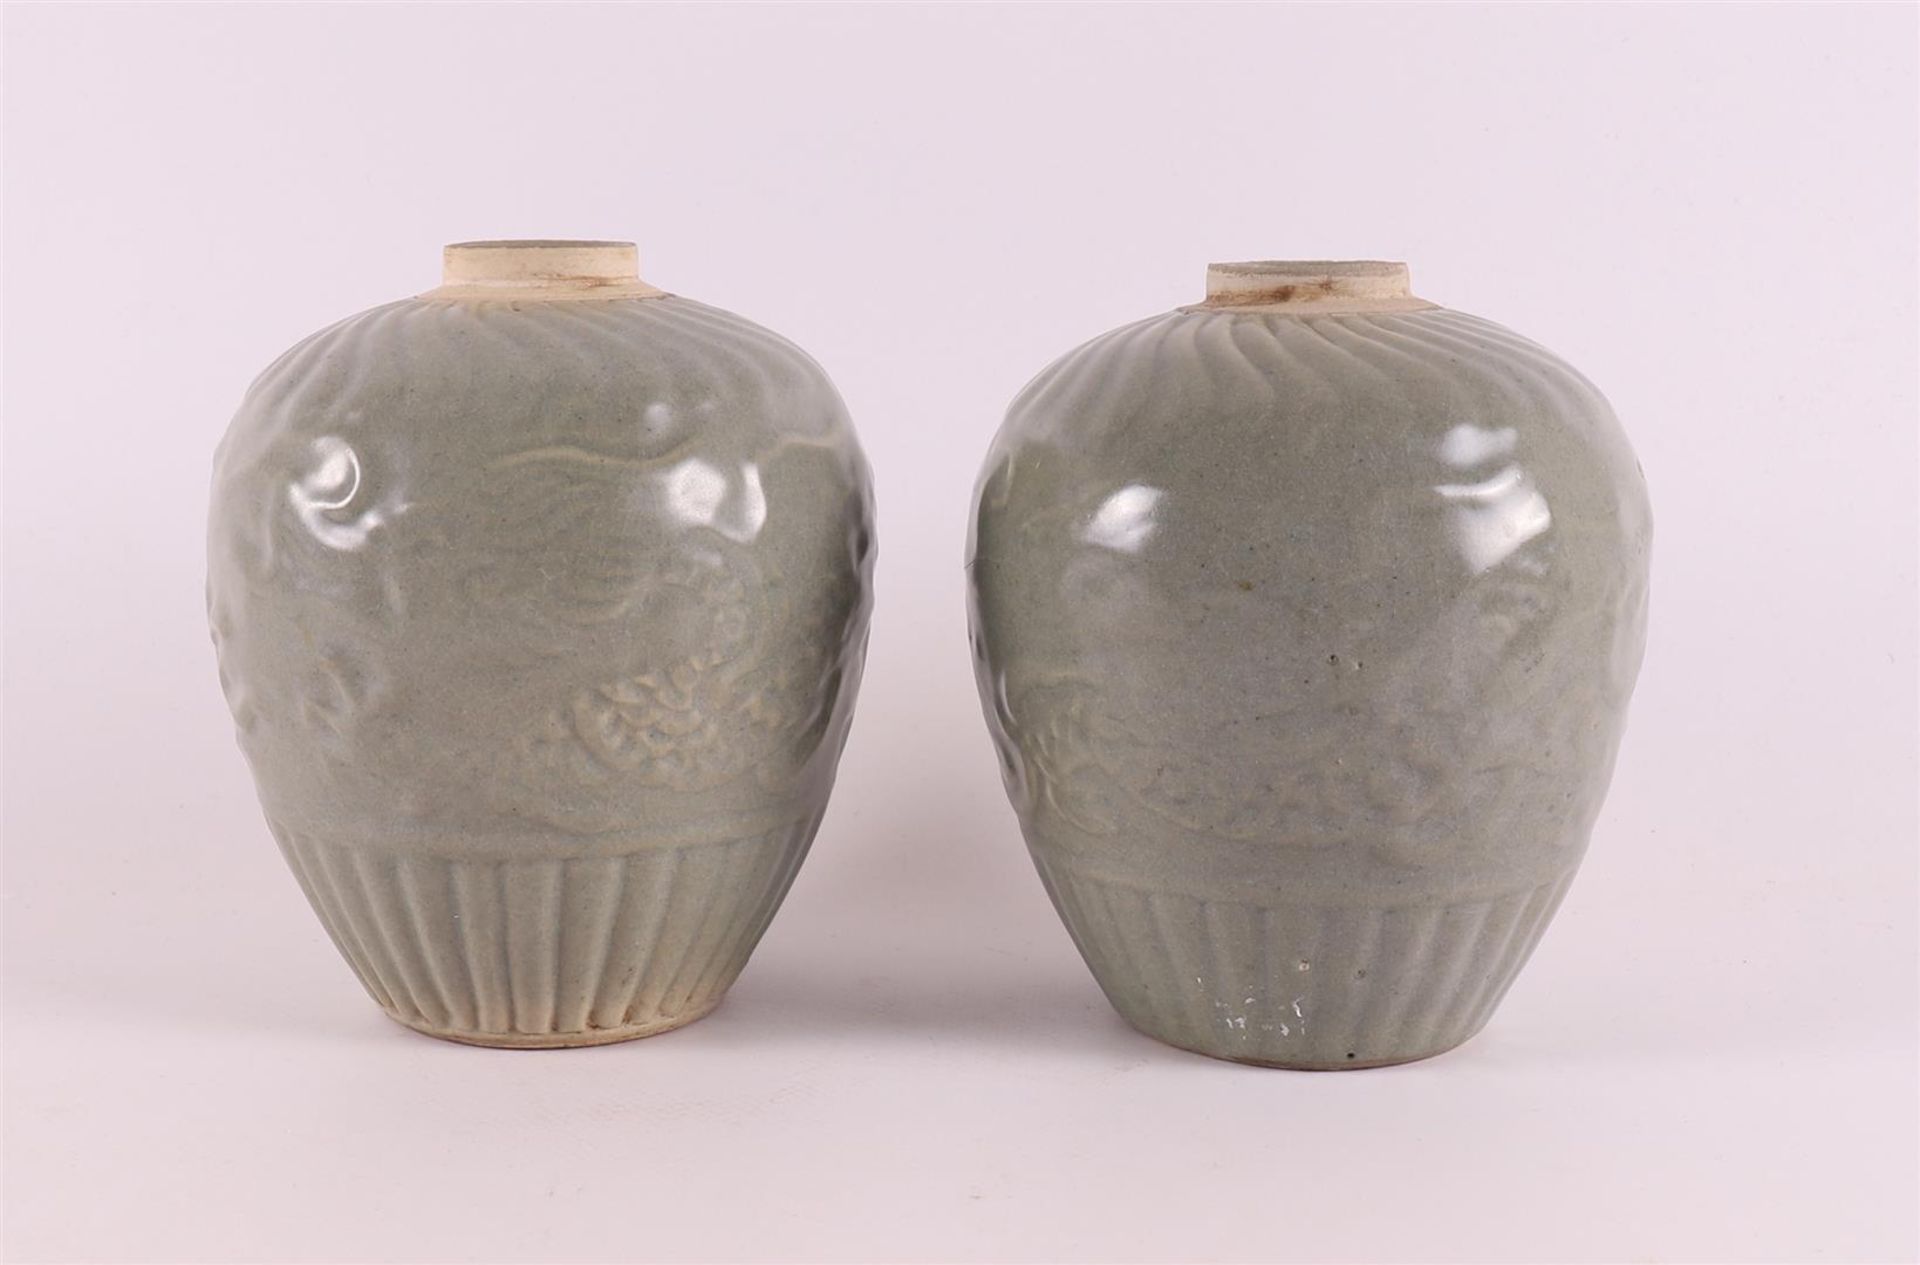 A pair of celadon glazed porcelain vase, China, 20th century or earlier. Relief decoration of dragon